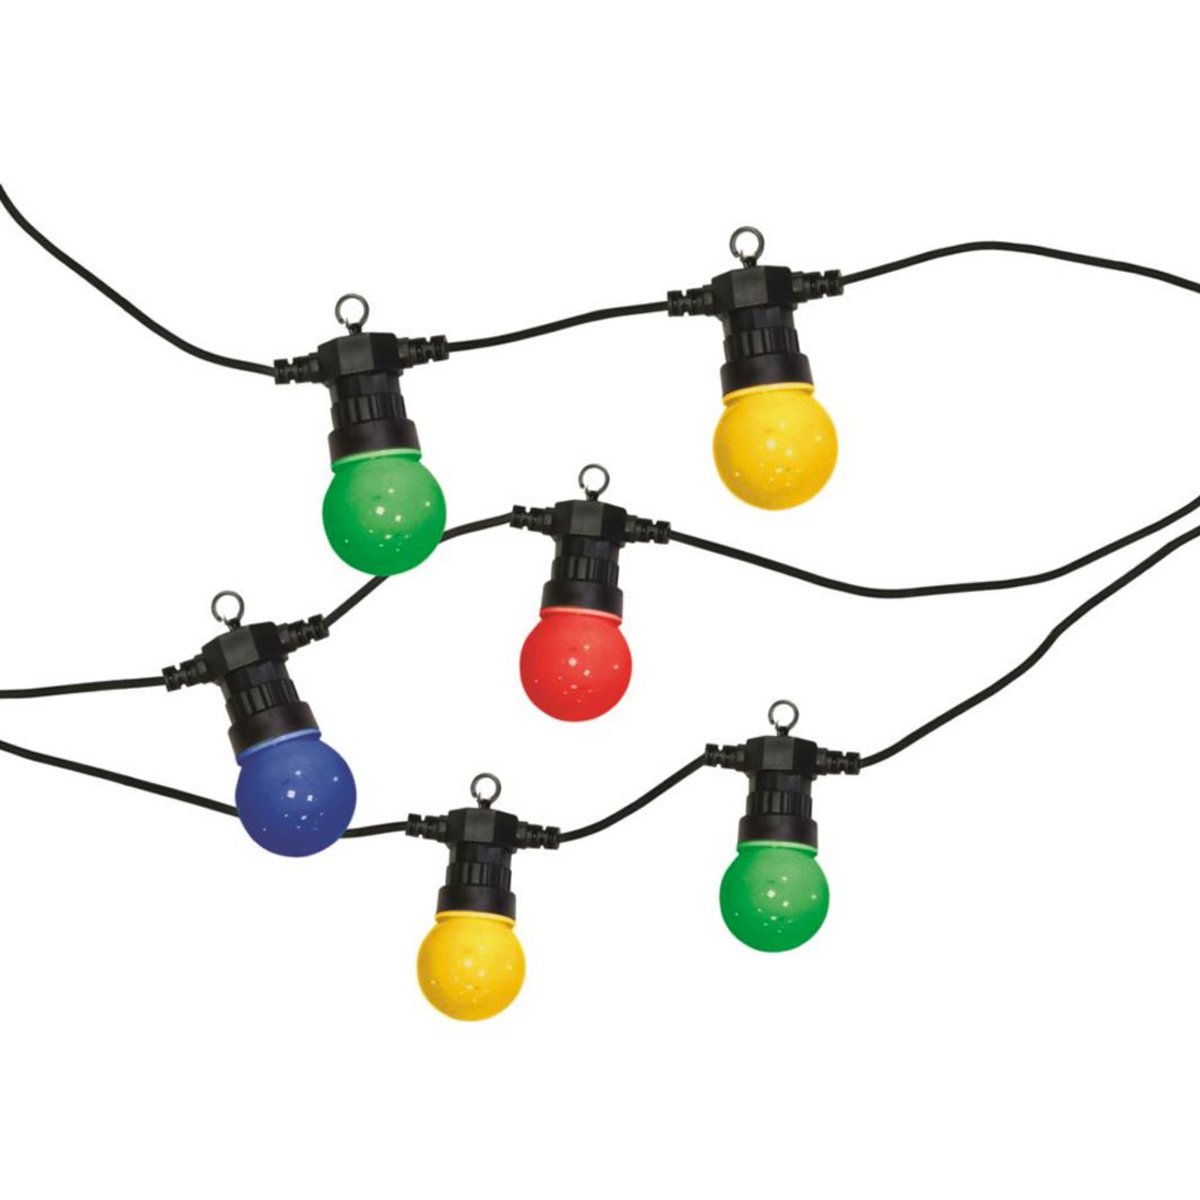 Transform your space and achieve a stylish glow with our ever popular festoon lighting kit. Our kits will allow you to connect up to 4 kits together and run off the same one plug with a low energy consumption.